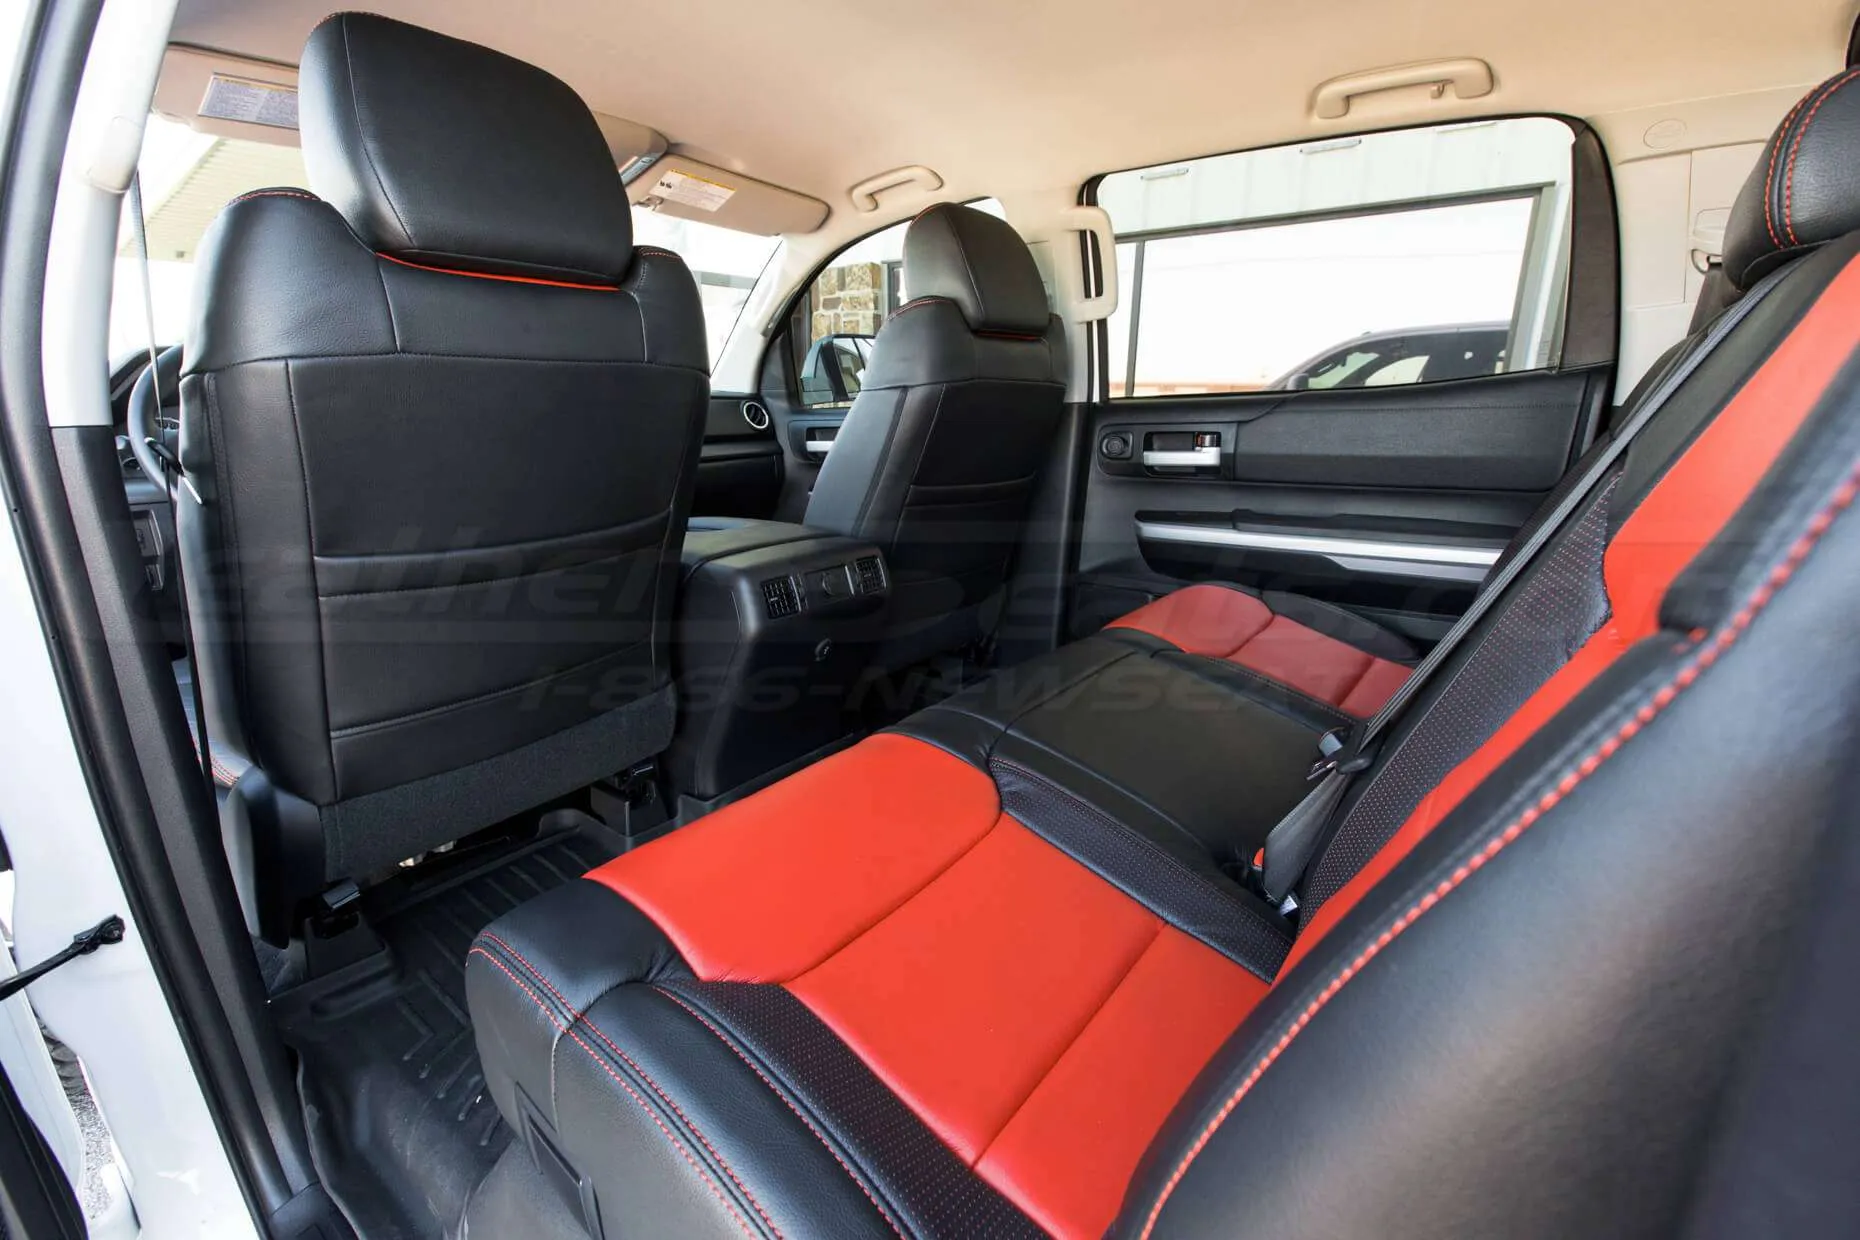 Toyota Tundra Leather Kit Installed - Black & Bright Red - Rear seats and back of front seats